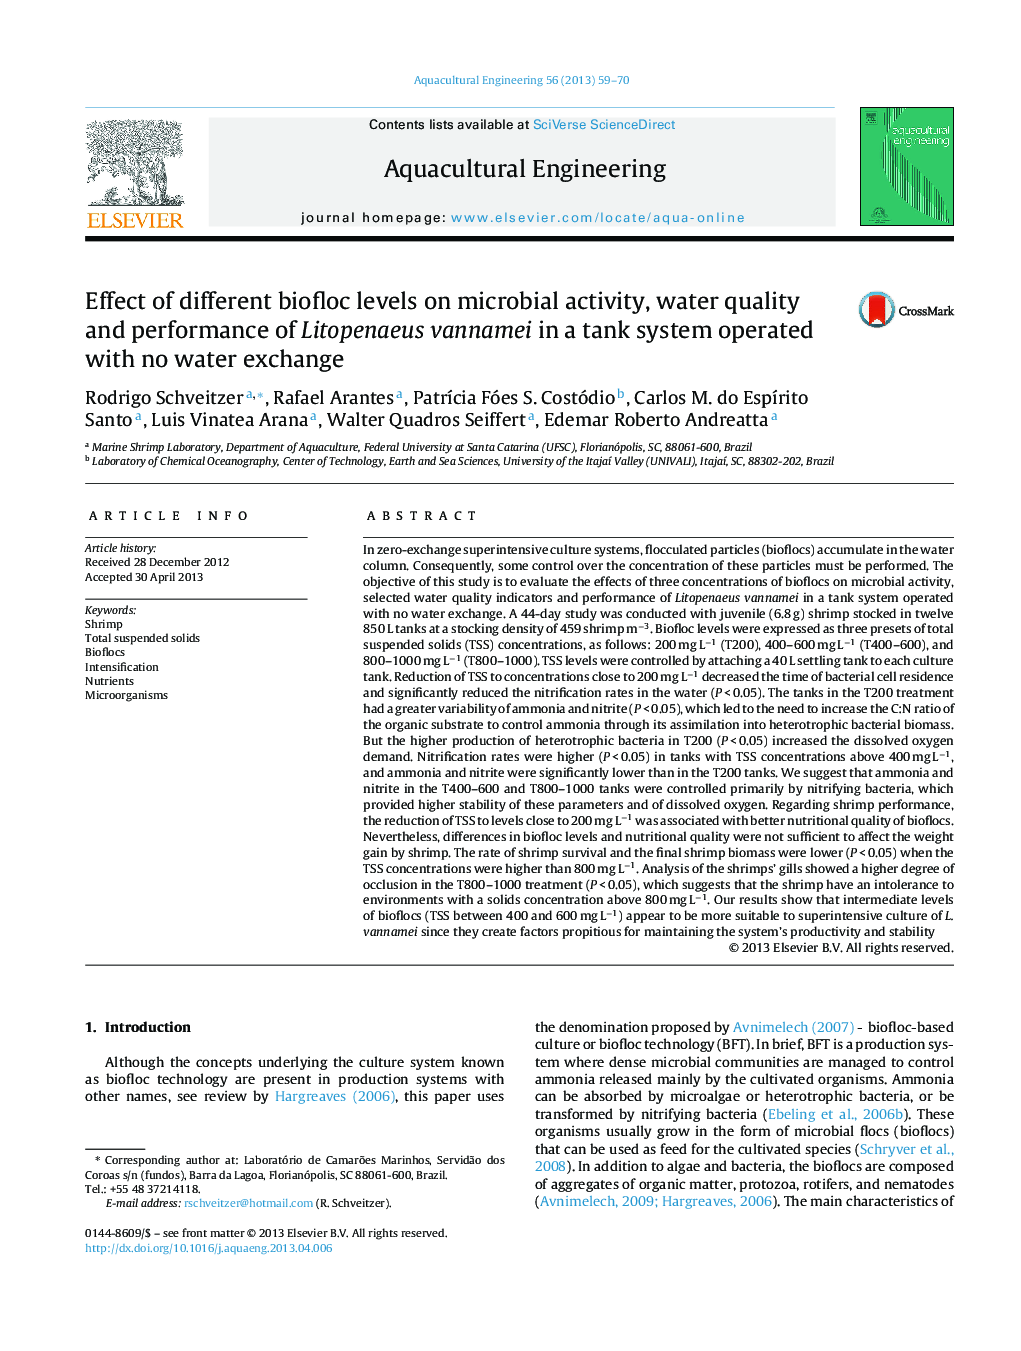 Effect of different biofloc levels on microbial activity, water quality and performance of Litopenaeus vannamei in a tank system operated with no water exchange